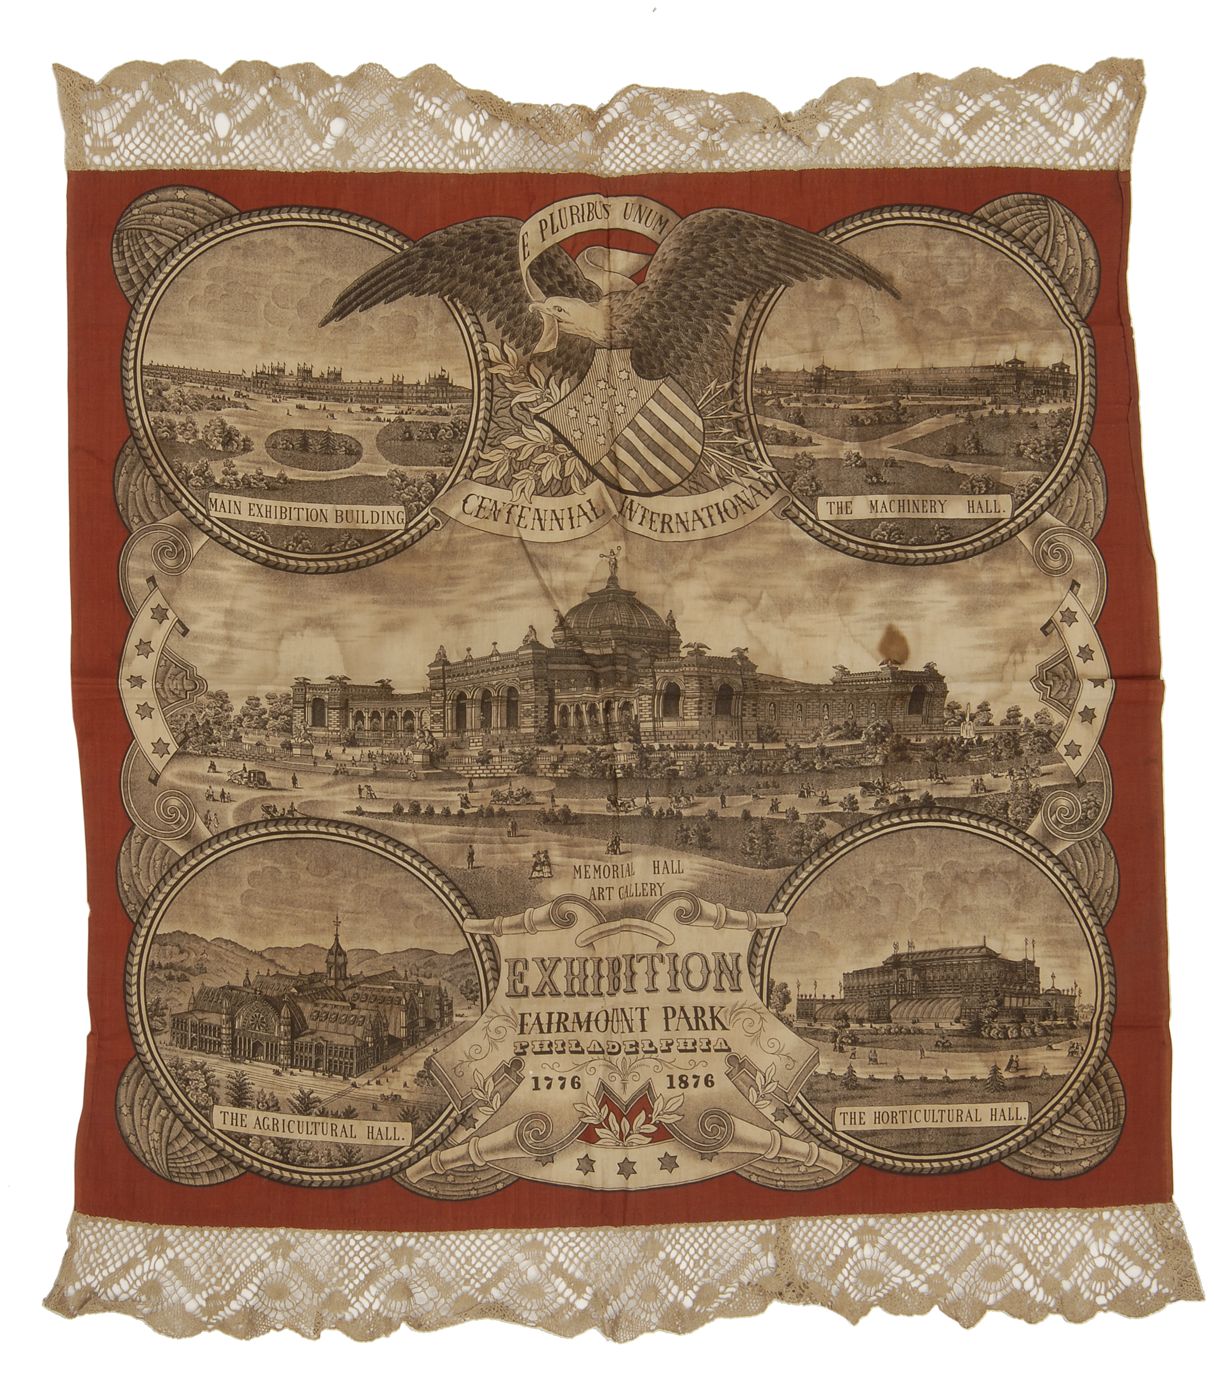 PRINTED COTTON SCARFDated 1876From